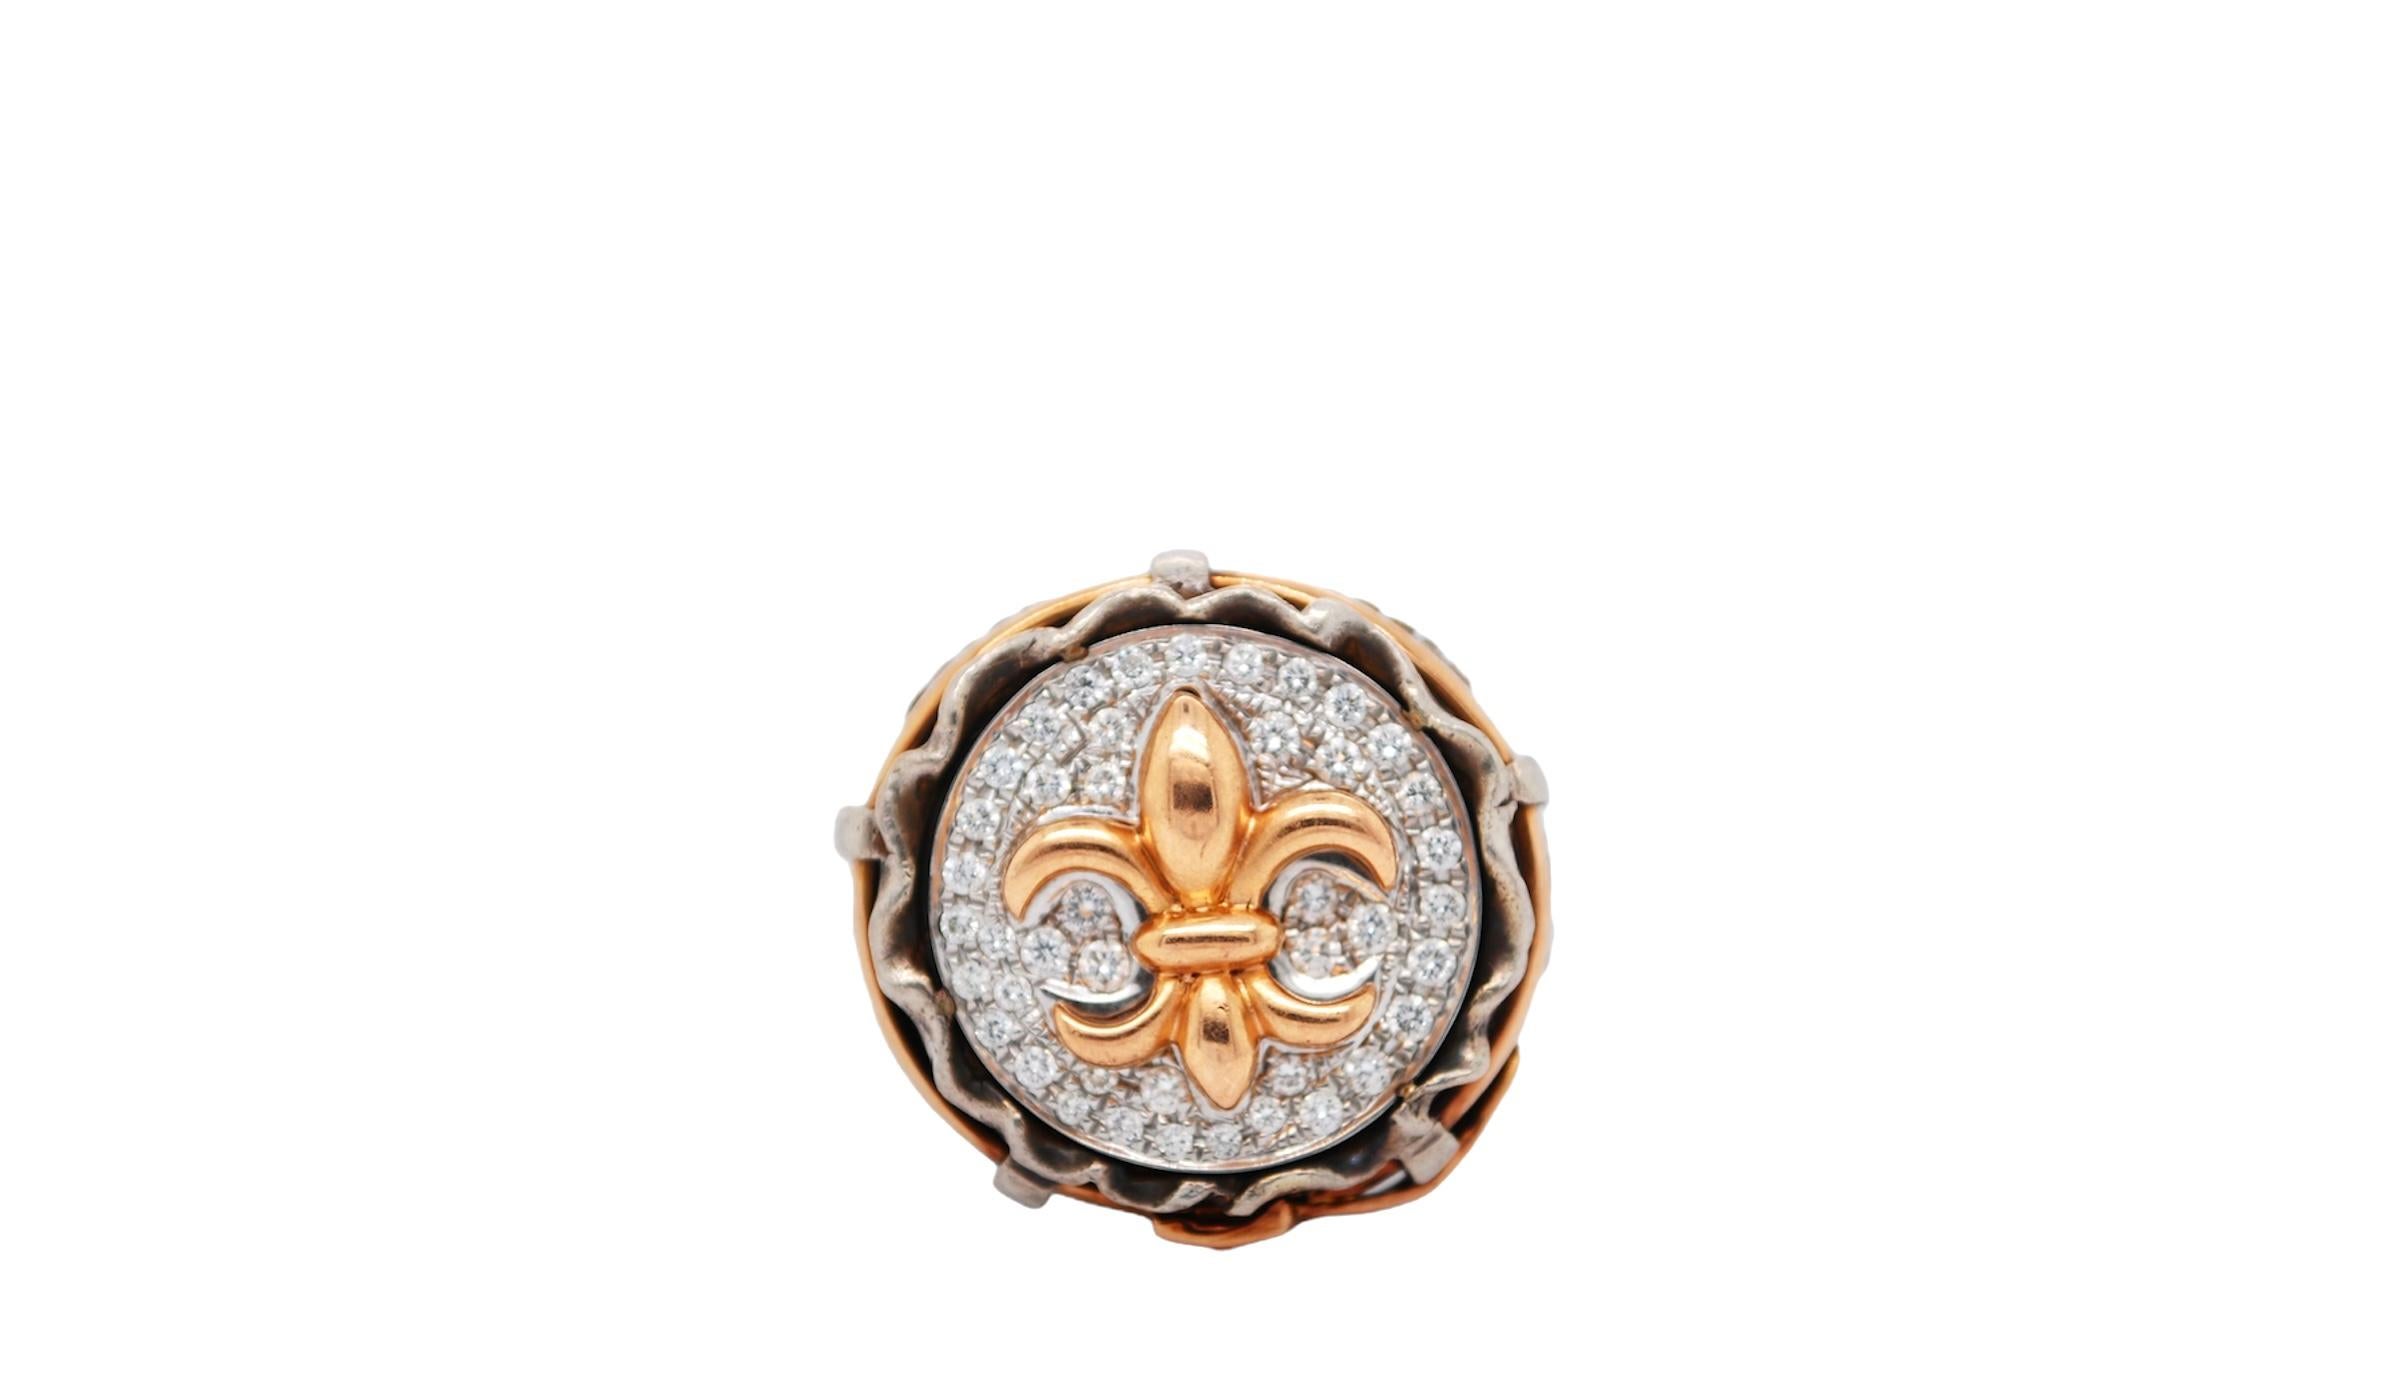 The Fleur de Lis is a beloved symbol that has been popular for over 1,000 years - it is elegance personified!

Fine White Diamonds .75cts

Sterling, 18K Rose Gold

Size medium 